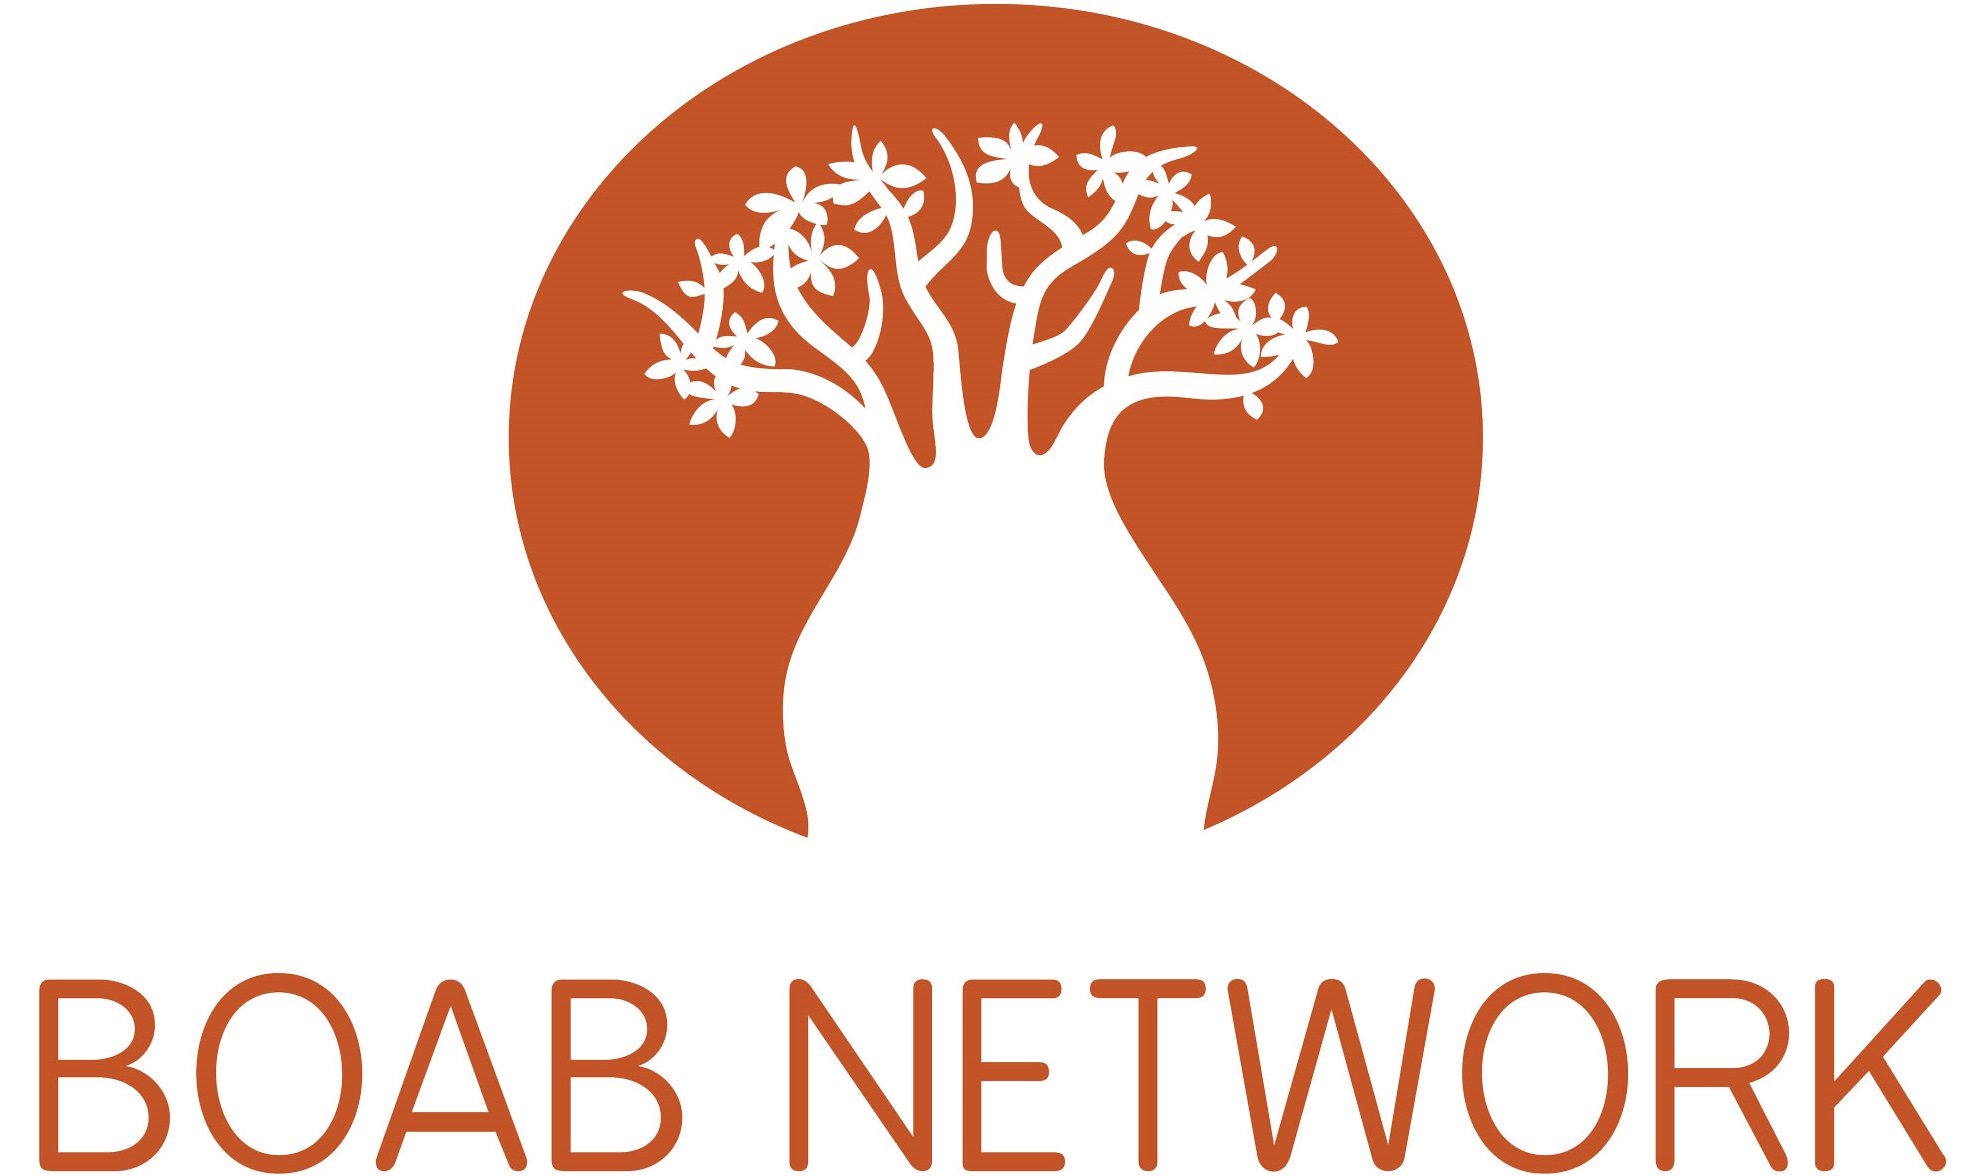 The Boab Network